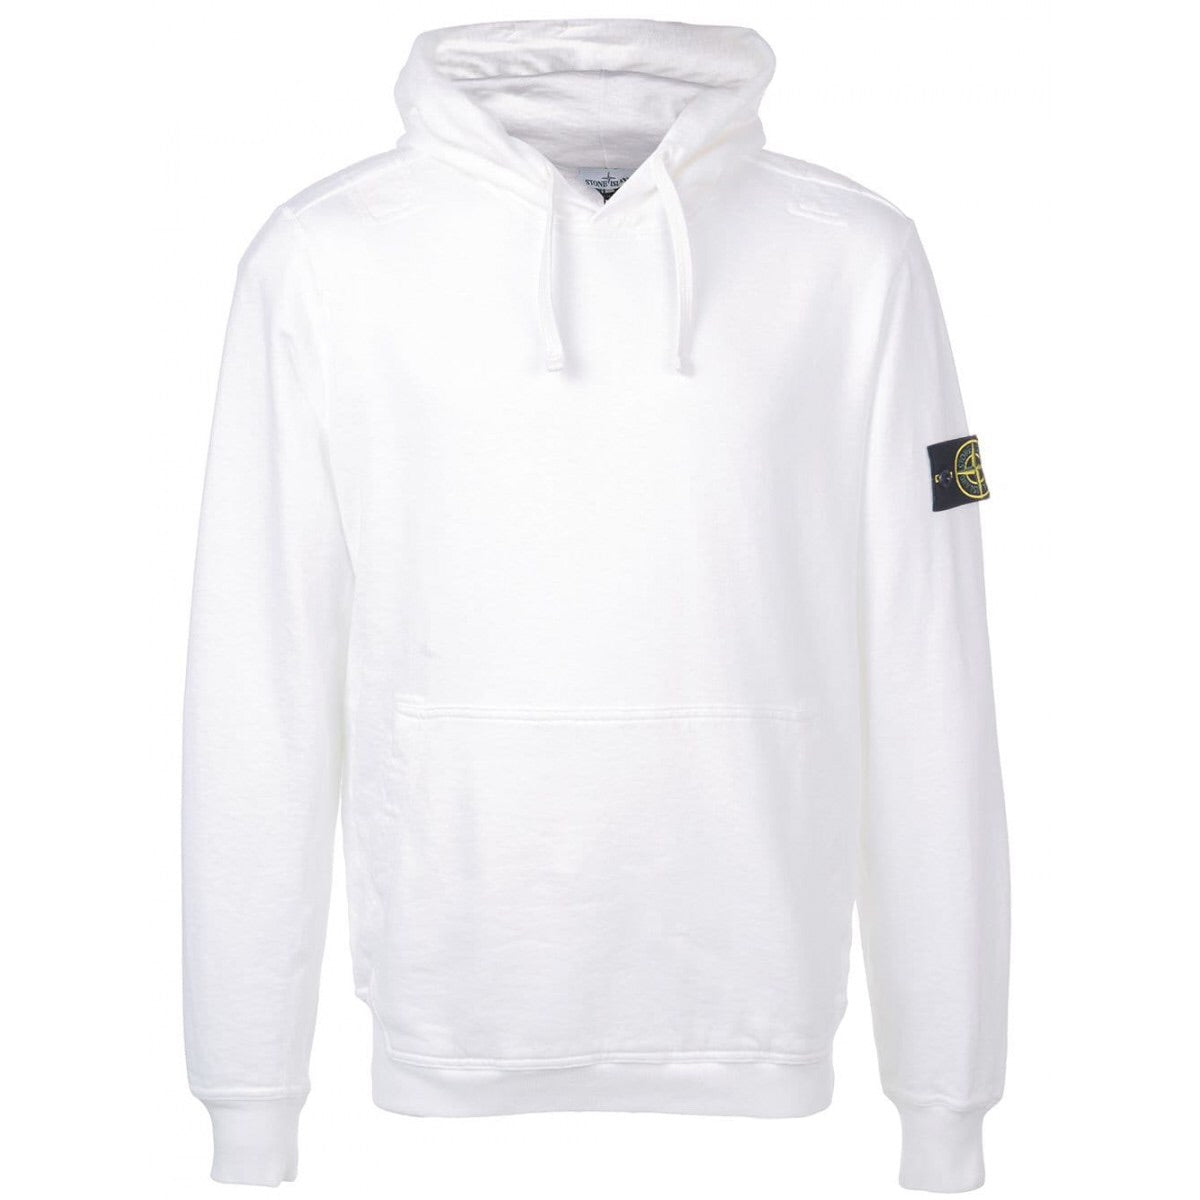 Stone Island “White” pullover hoodie - Centrall Online